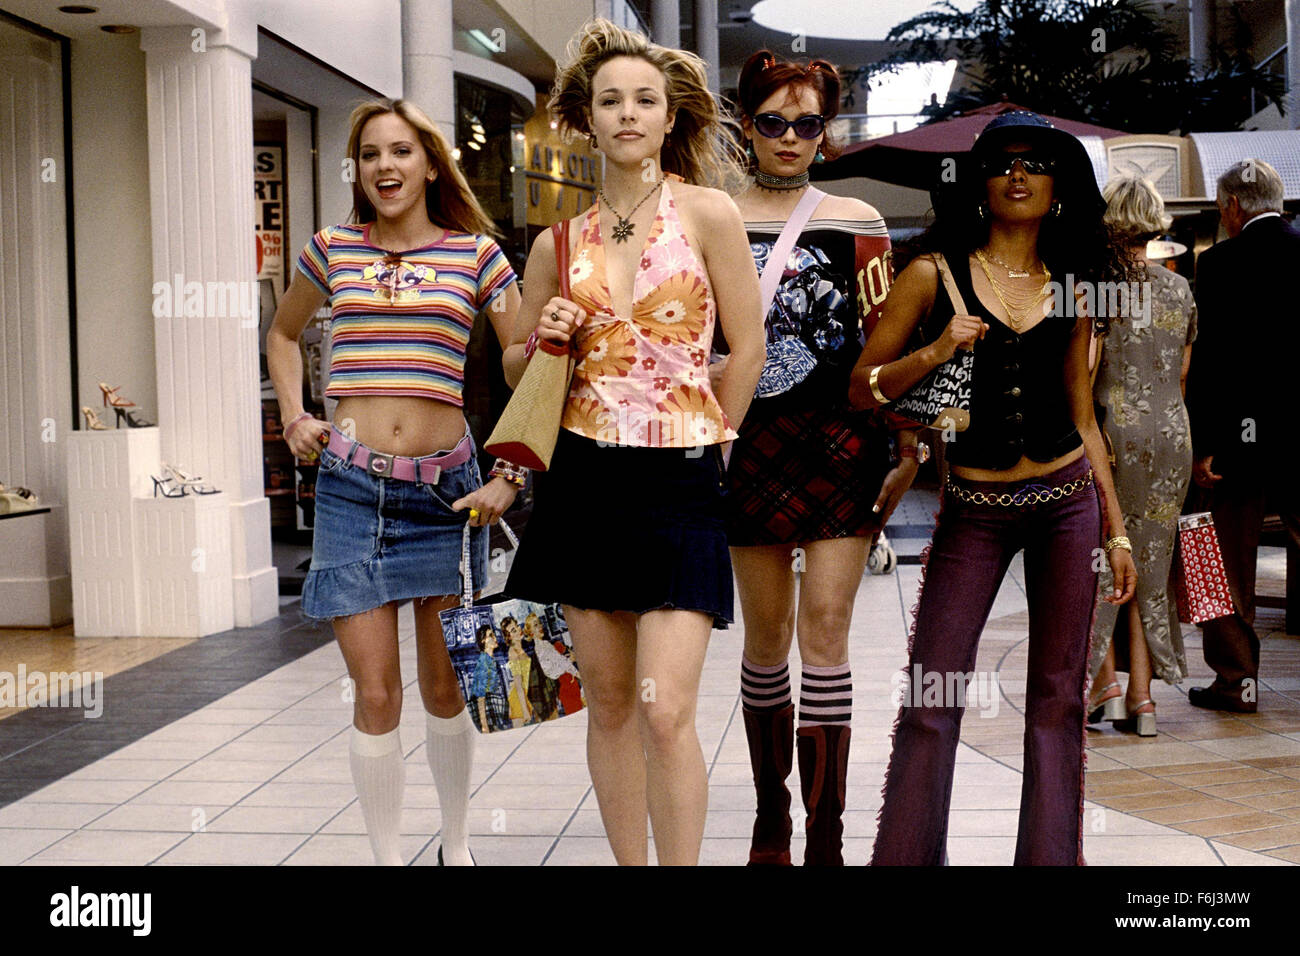 Dec 02, 2002; Hollywood, CA, USA; (from left to right) ANNA FARIS as April Thomas, RACHEL MCADAMS as Jessica Spencer, ALEXANDRA HOLDEN as Lulu, and MARITZA MURRAY as Keecia 'Ling-Ling' Jackson in the comedy ''The Hot Chick'' directed by Tom Brady. Stock Photo